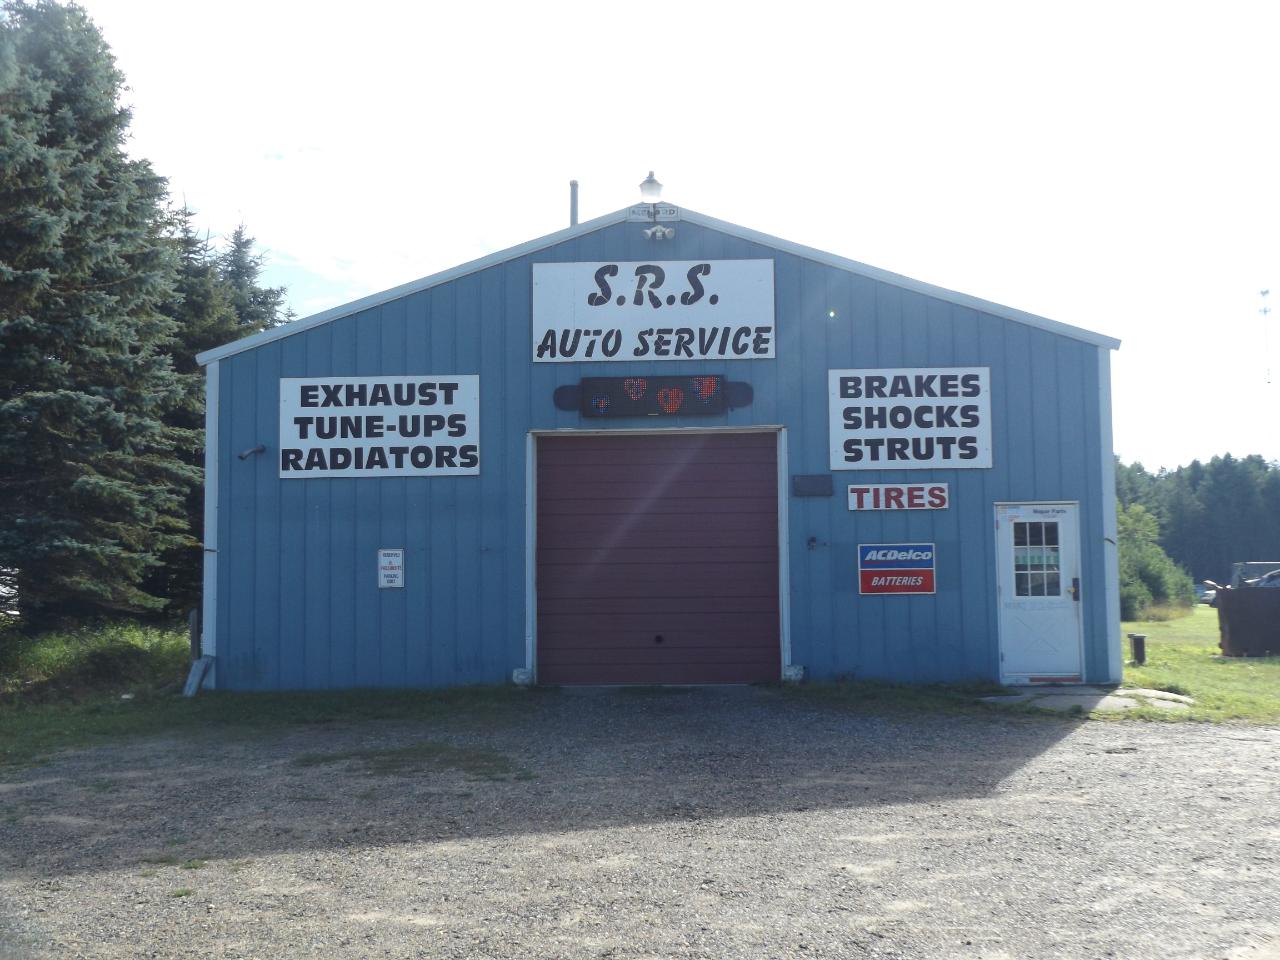 After 31 years in the business the Seller is ready to go fishing. This highly visible Auto Service Center has a long history of repeat and satisfied customer base. Both Imported and Domestic service work that includes brakes tune-ups, exhaust, suspension, engine, electrical, fuel injection work, trailer hitches and tires. High traffic count on one of Vilas Counties busier roads. Located just 3 miles south of Eagle River. Set up nicely for a 1 or 2 person shop. The business sits on 2.3 acres and there is room for expansion or an additional business. Buyer to verify all measurements and zoning. Seller selling in as is condition.